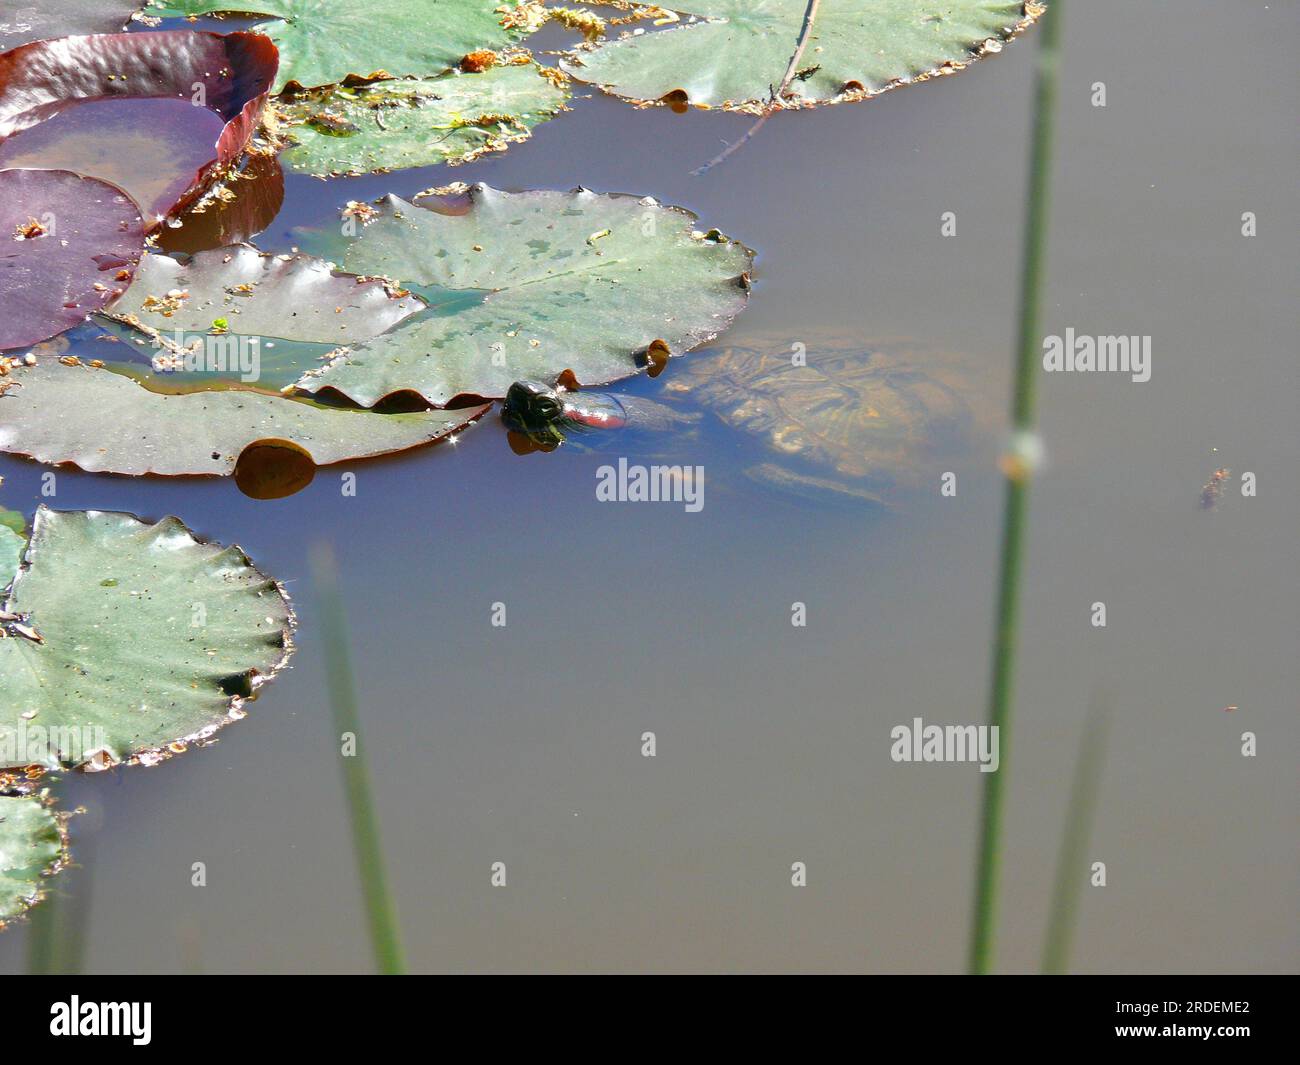 Pond with lily pads, water turtle, european pond turtle (Emys orbicularis) Stock Photo